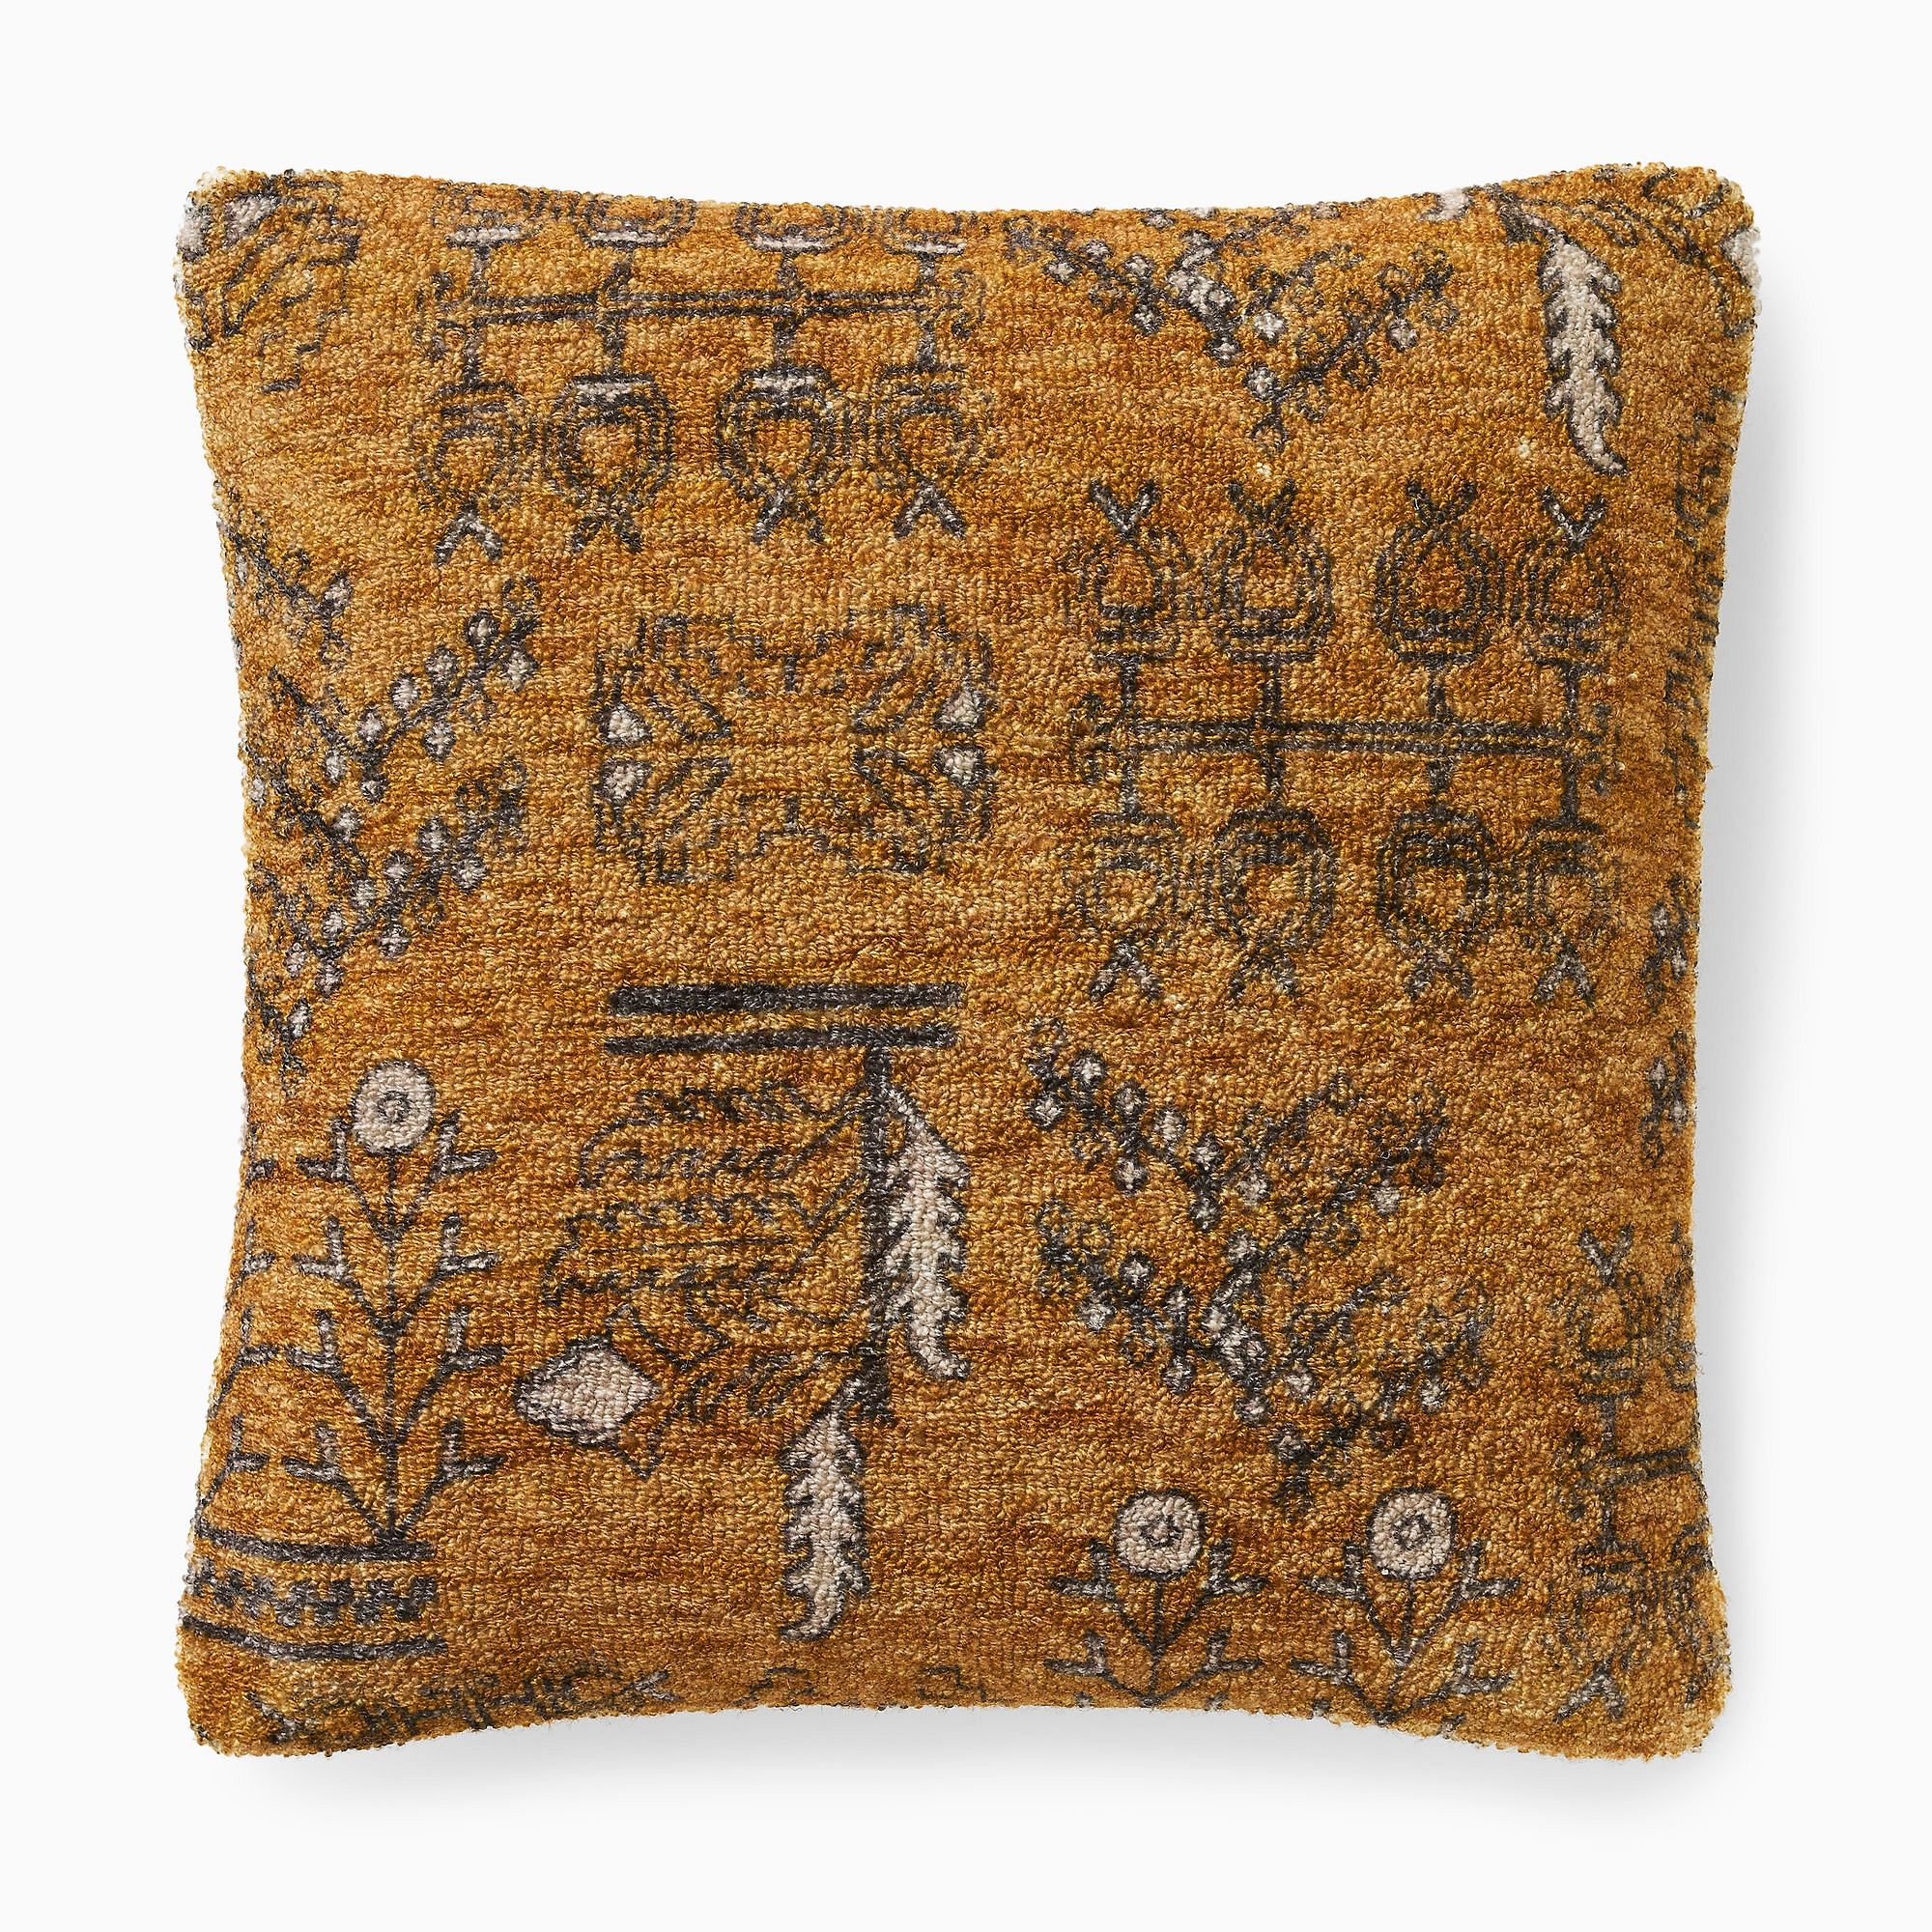 Ivy Pillow Cover | West Elm